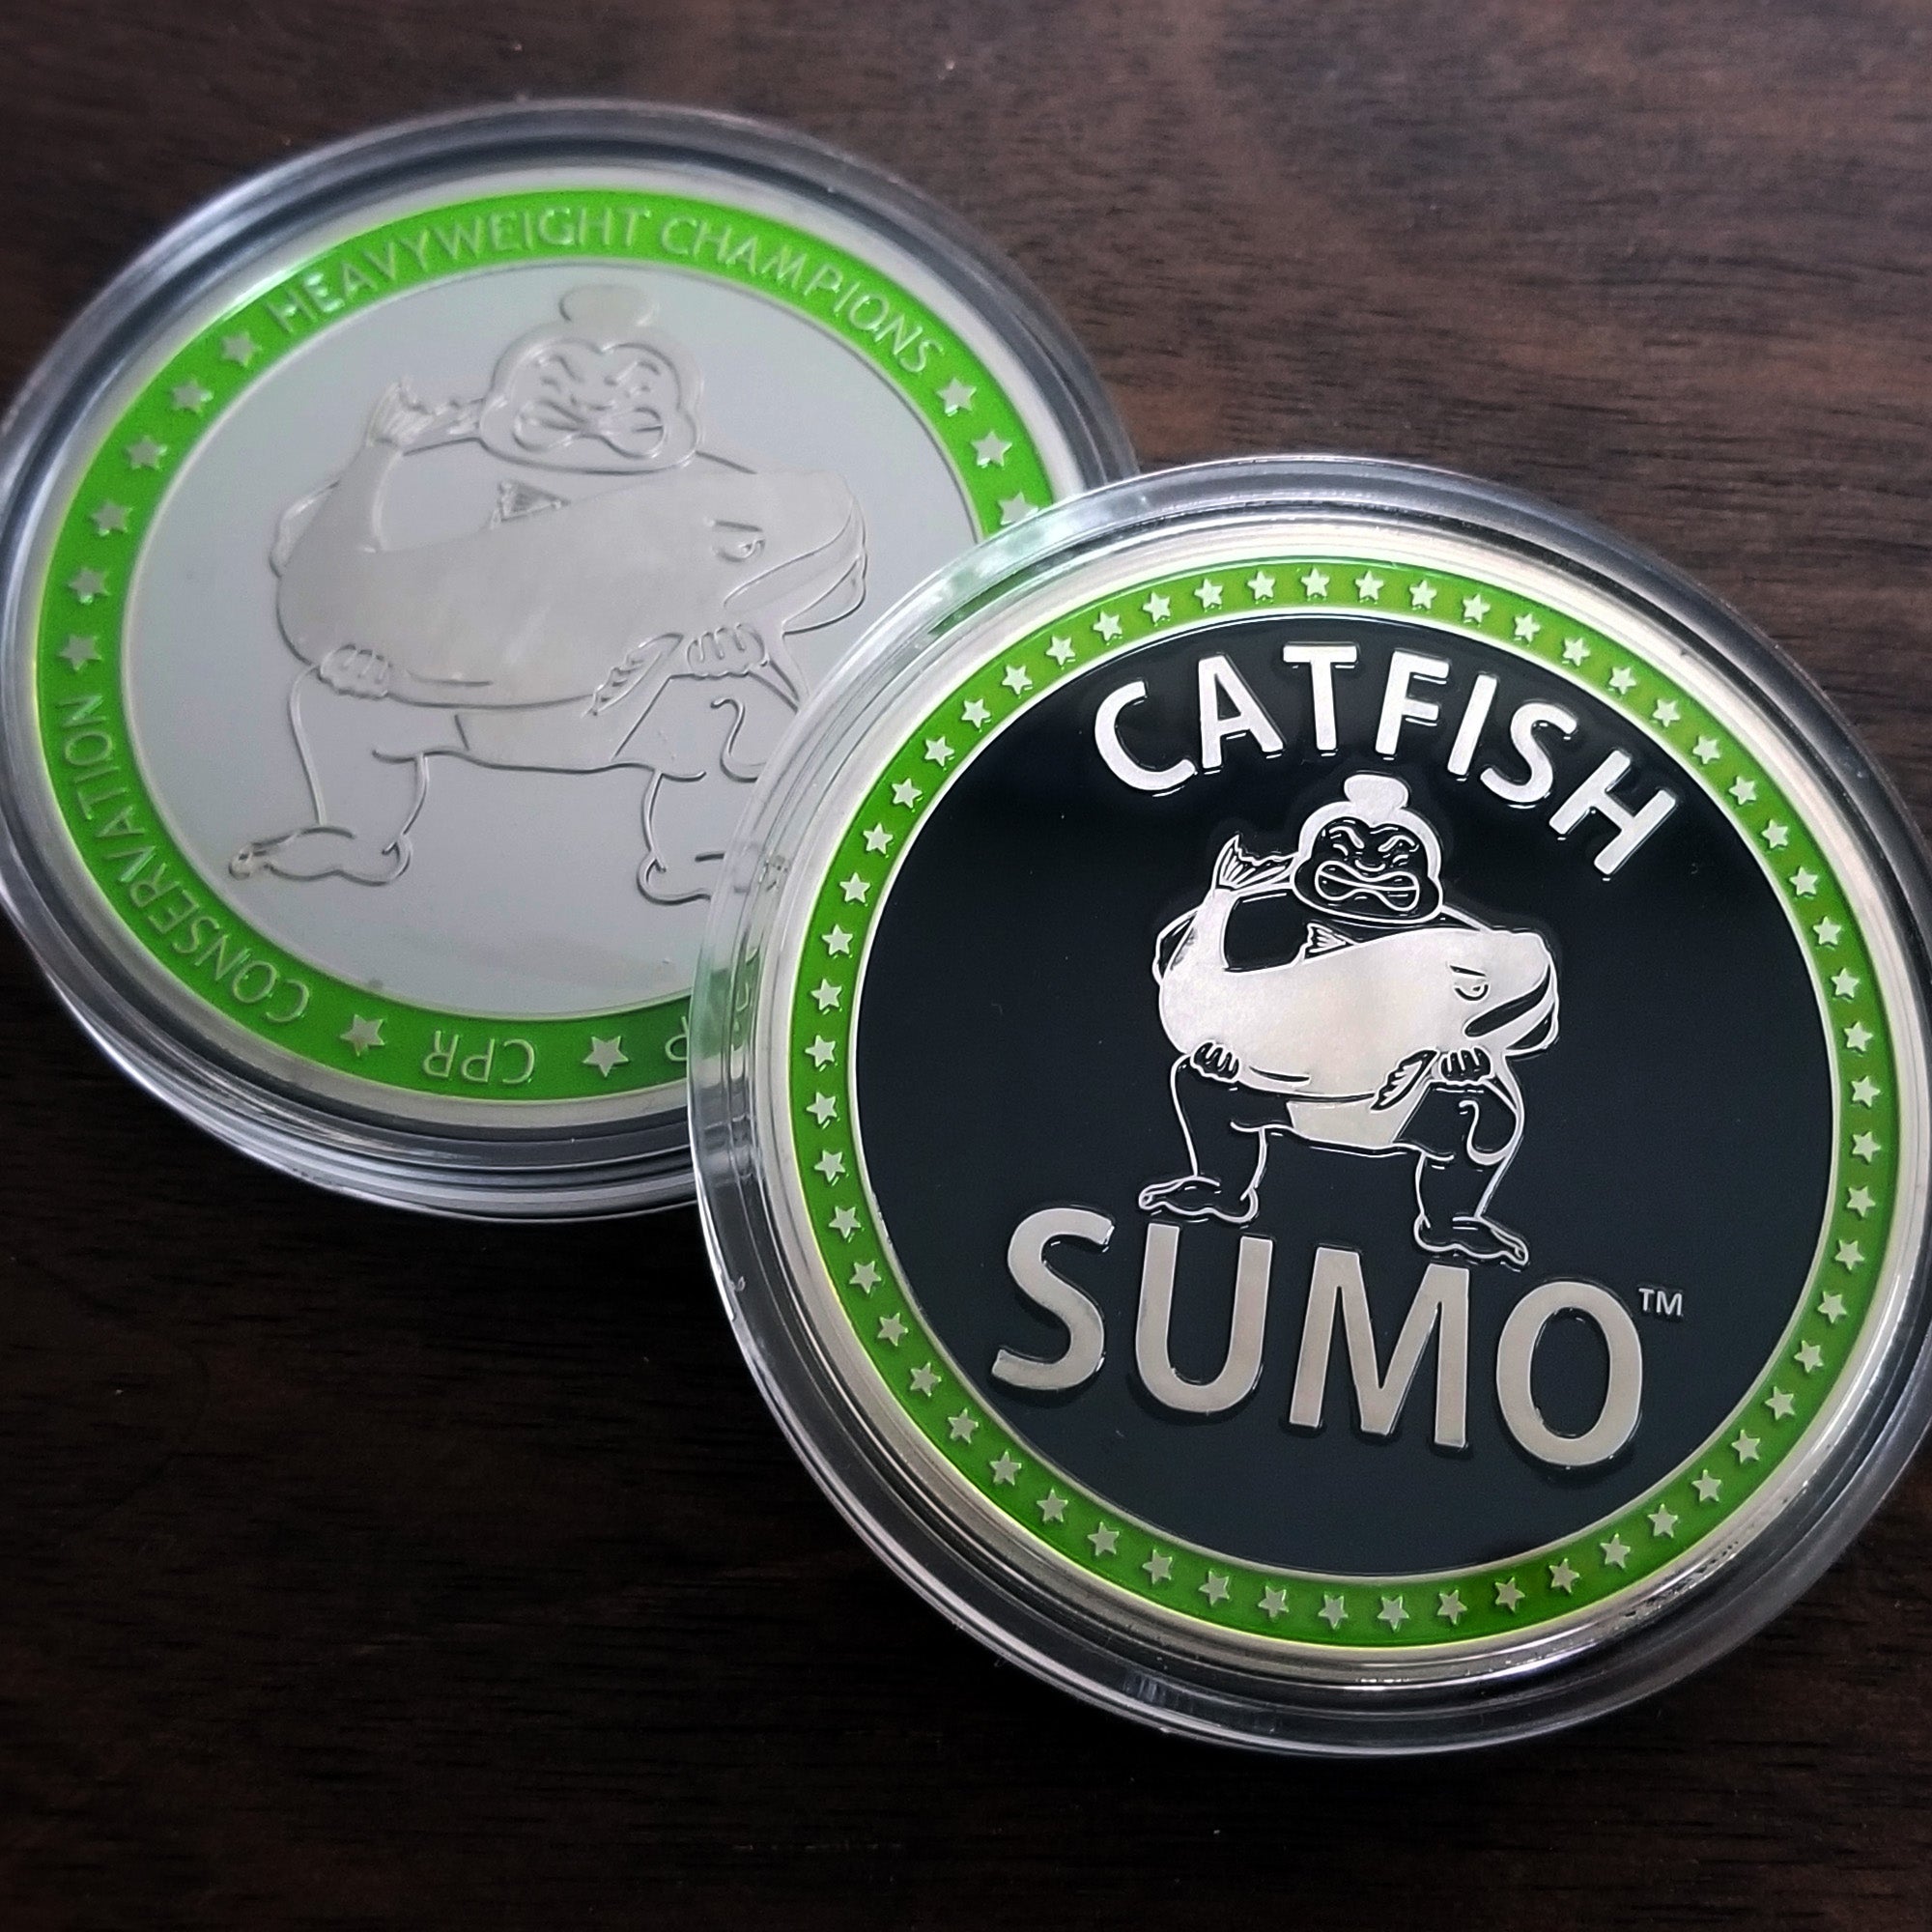 Heavyweight Champions Recognition – Catfish Sumo